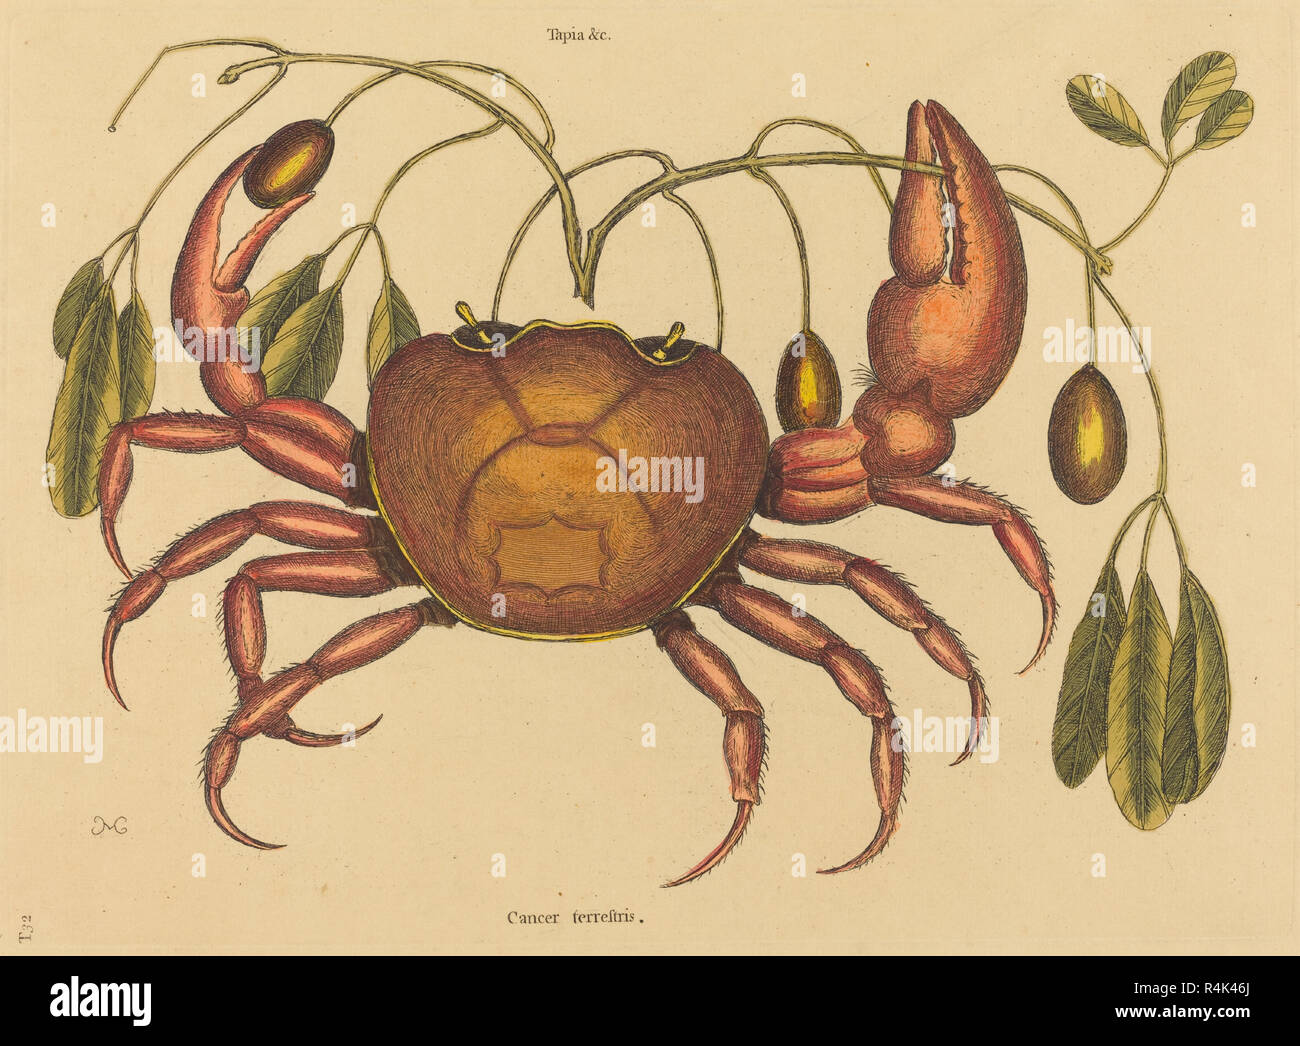 The Land-crab (Cancer ruricola). Dated: published 1731-1743. Dimensions: plate: 25.7 x 35.4 cm (10 1/8 x 13 15/16 in.)  sheet: 35.7 x 53 cm (14 1/16 x 20 7/8 in.). Medium: hand-colored engraving on laid paper. Museum: National Gallery of Art, Washington DC. Author: Mark Catesby. CATESBY, MARK. Stock Photo